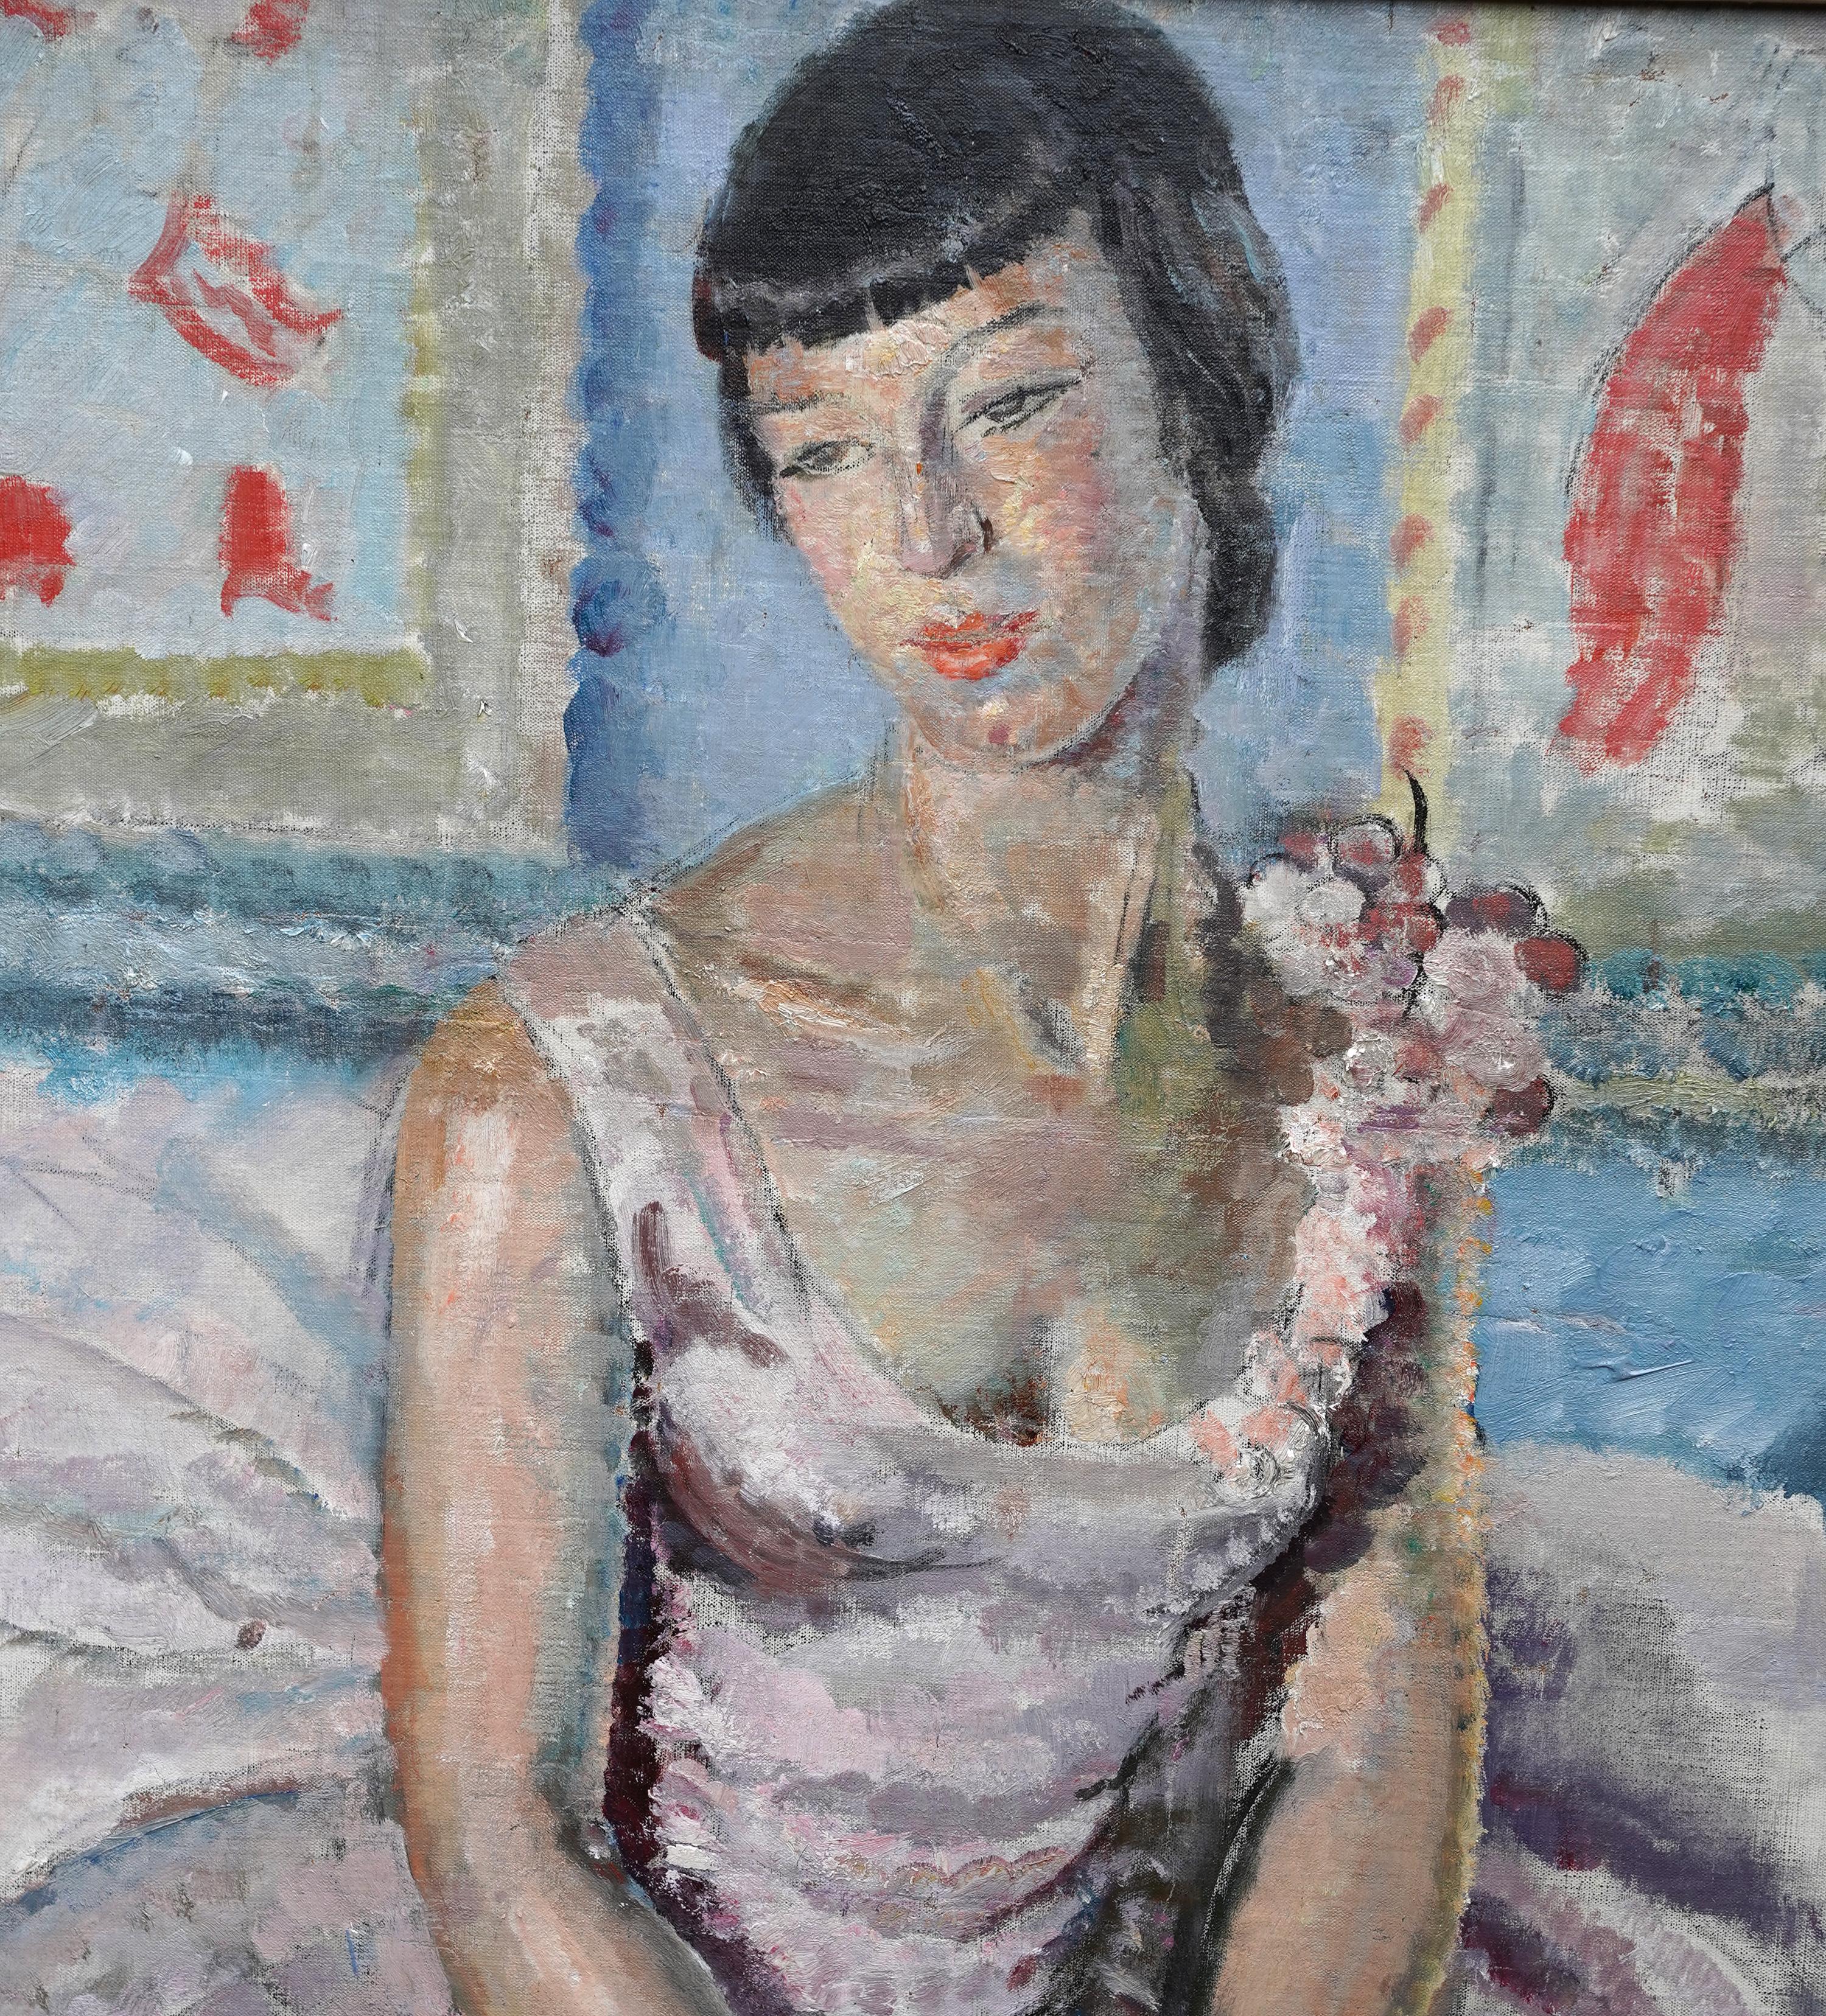 This charming British 1930's Post Impressionist portrait oil painting of a ballerina is by noted female artist Cathleen Sabine Mann. Ballerinas are a popular subject matter in art, conveying great poise, movement and elegance and of course made